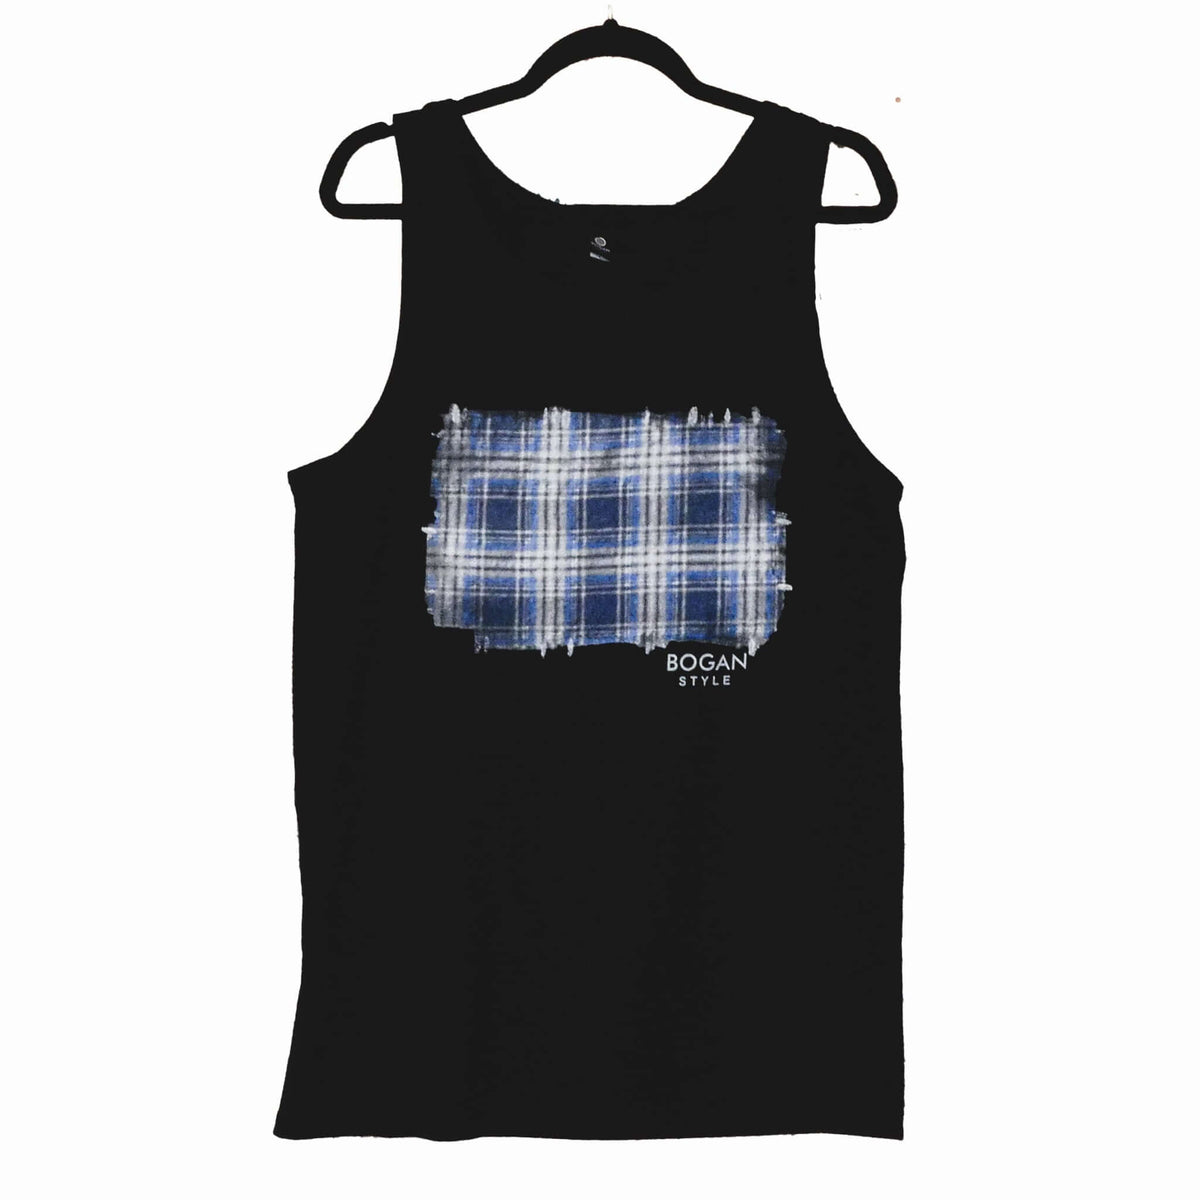 Black singlet with cool flanno graphic design